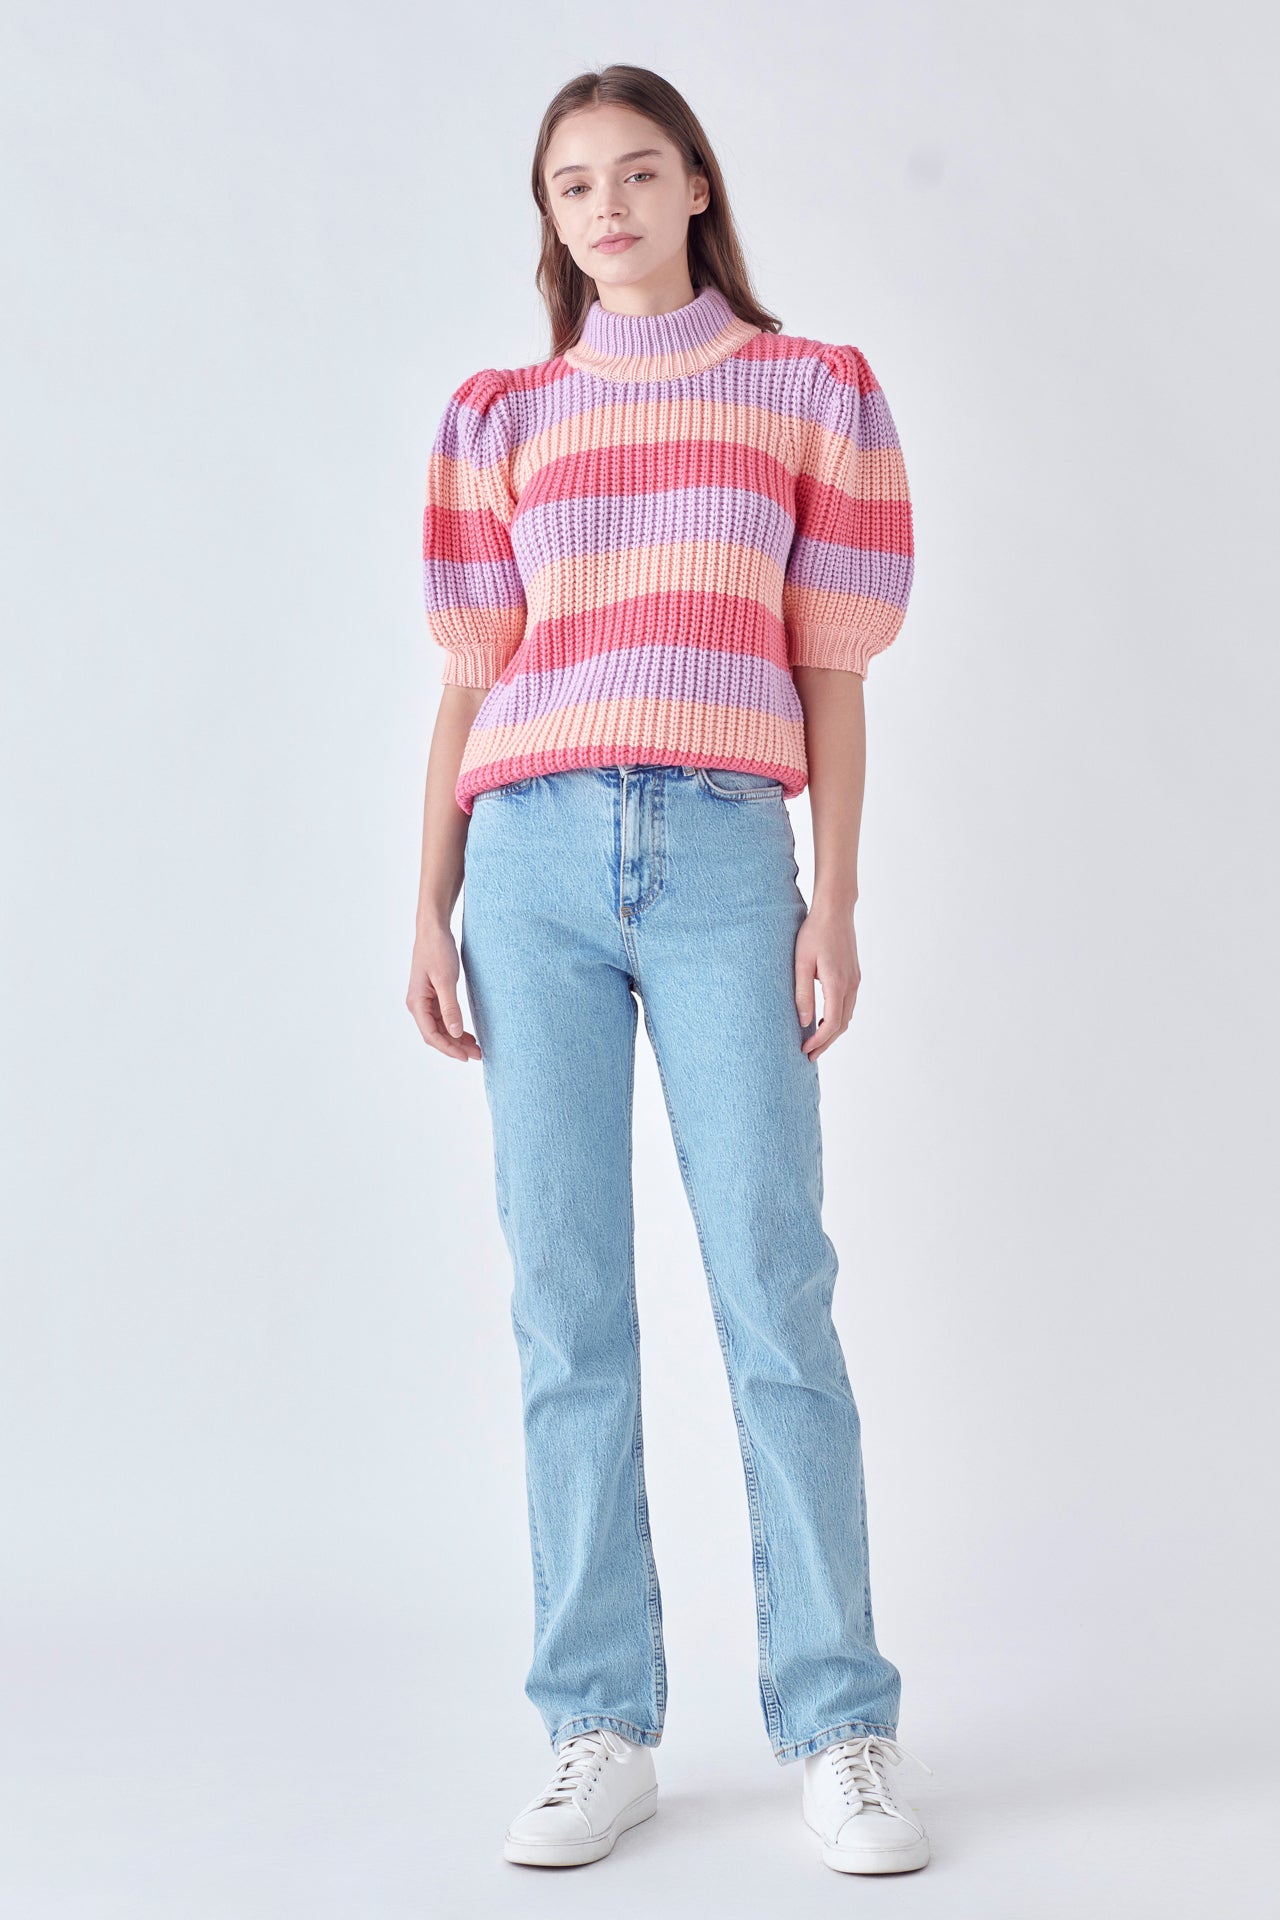 ENGLISH FACTORY - Stripe Mockneck Sweater - SWEATERS & KNITS available at Objectrare